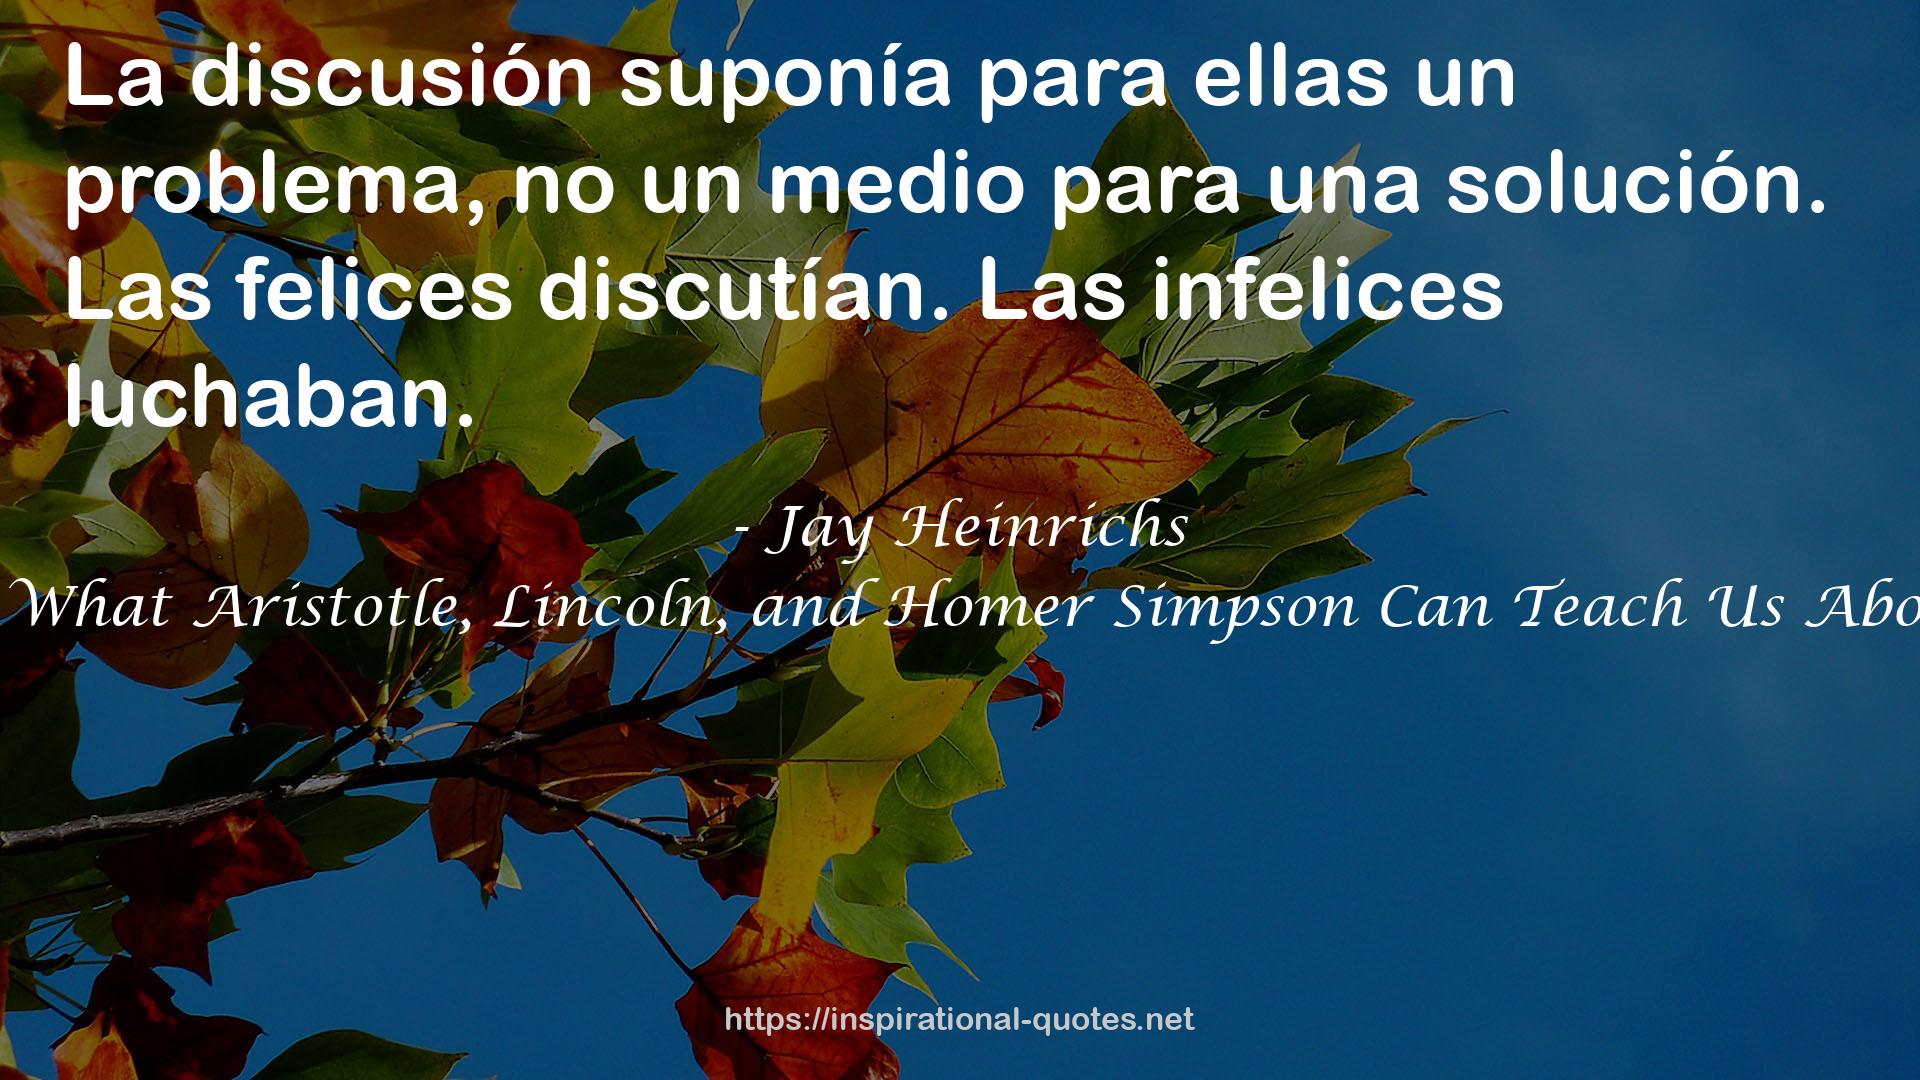 Jay Heinrichs QUOTES